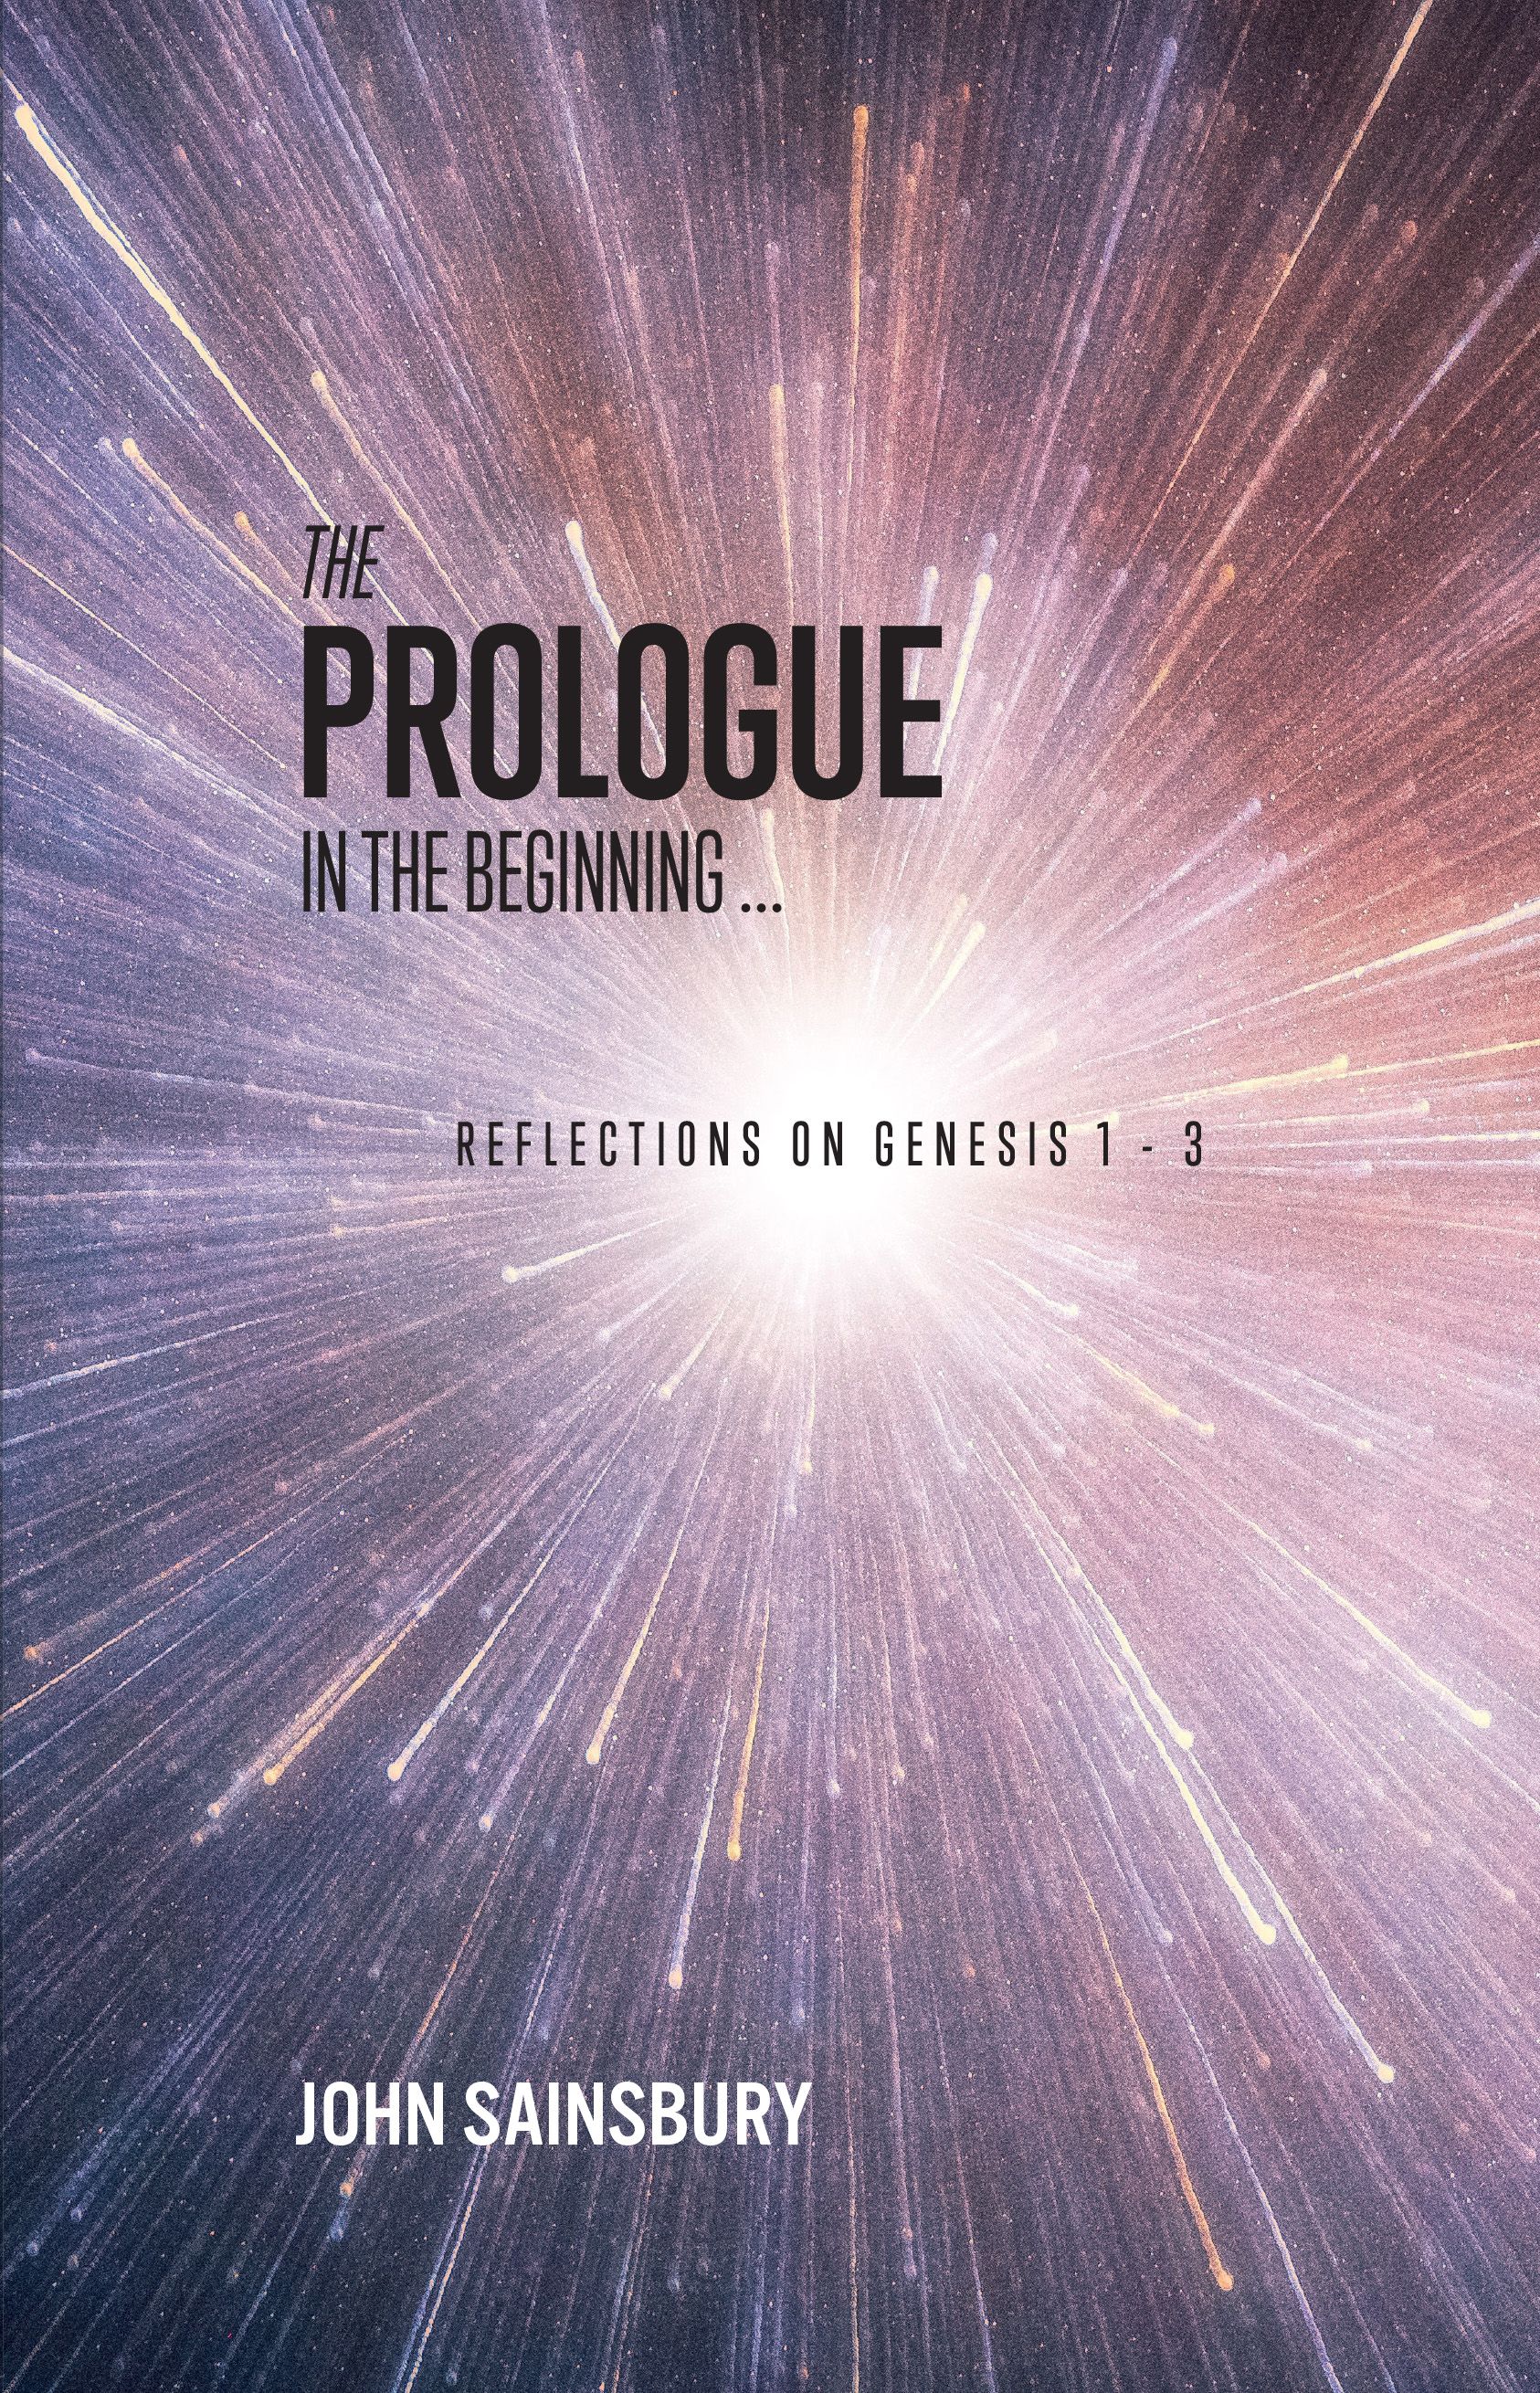 The Prologue: In the Beginning